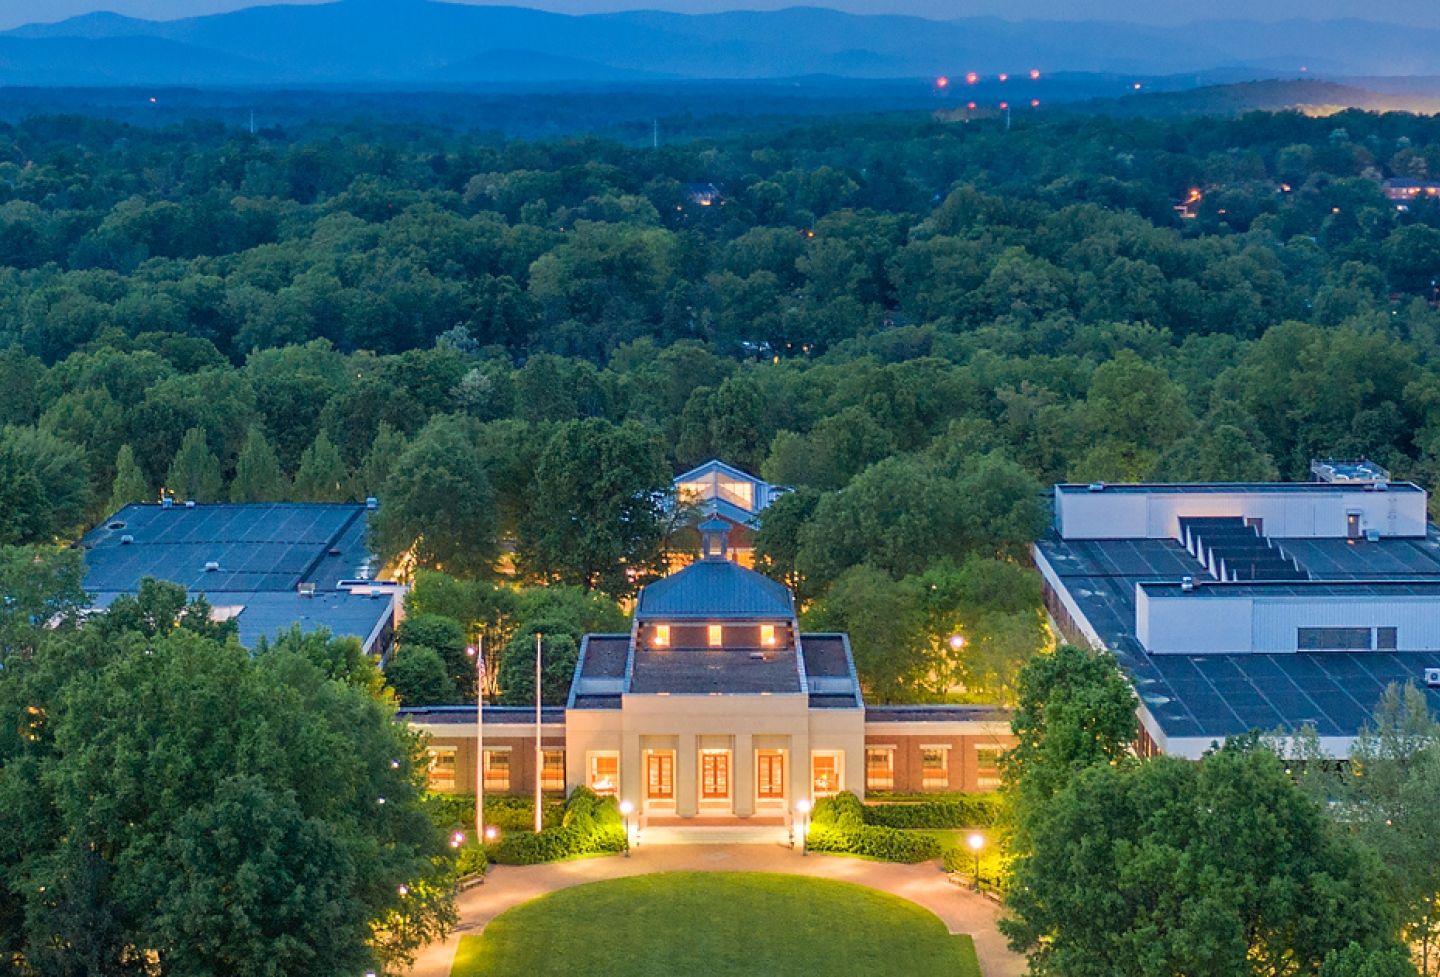 The year at the University of Virginia School of Law was marked by new achievements and milestones, even as the community was tested in the spring when classes moved online due to COVID-19.